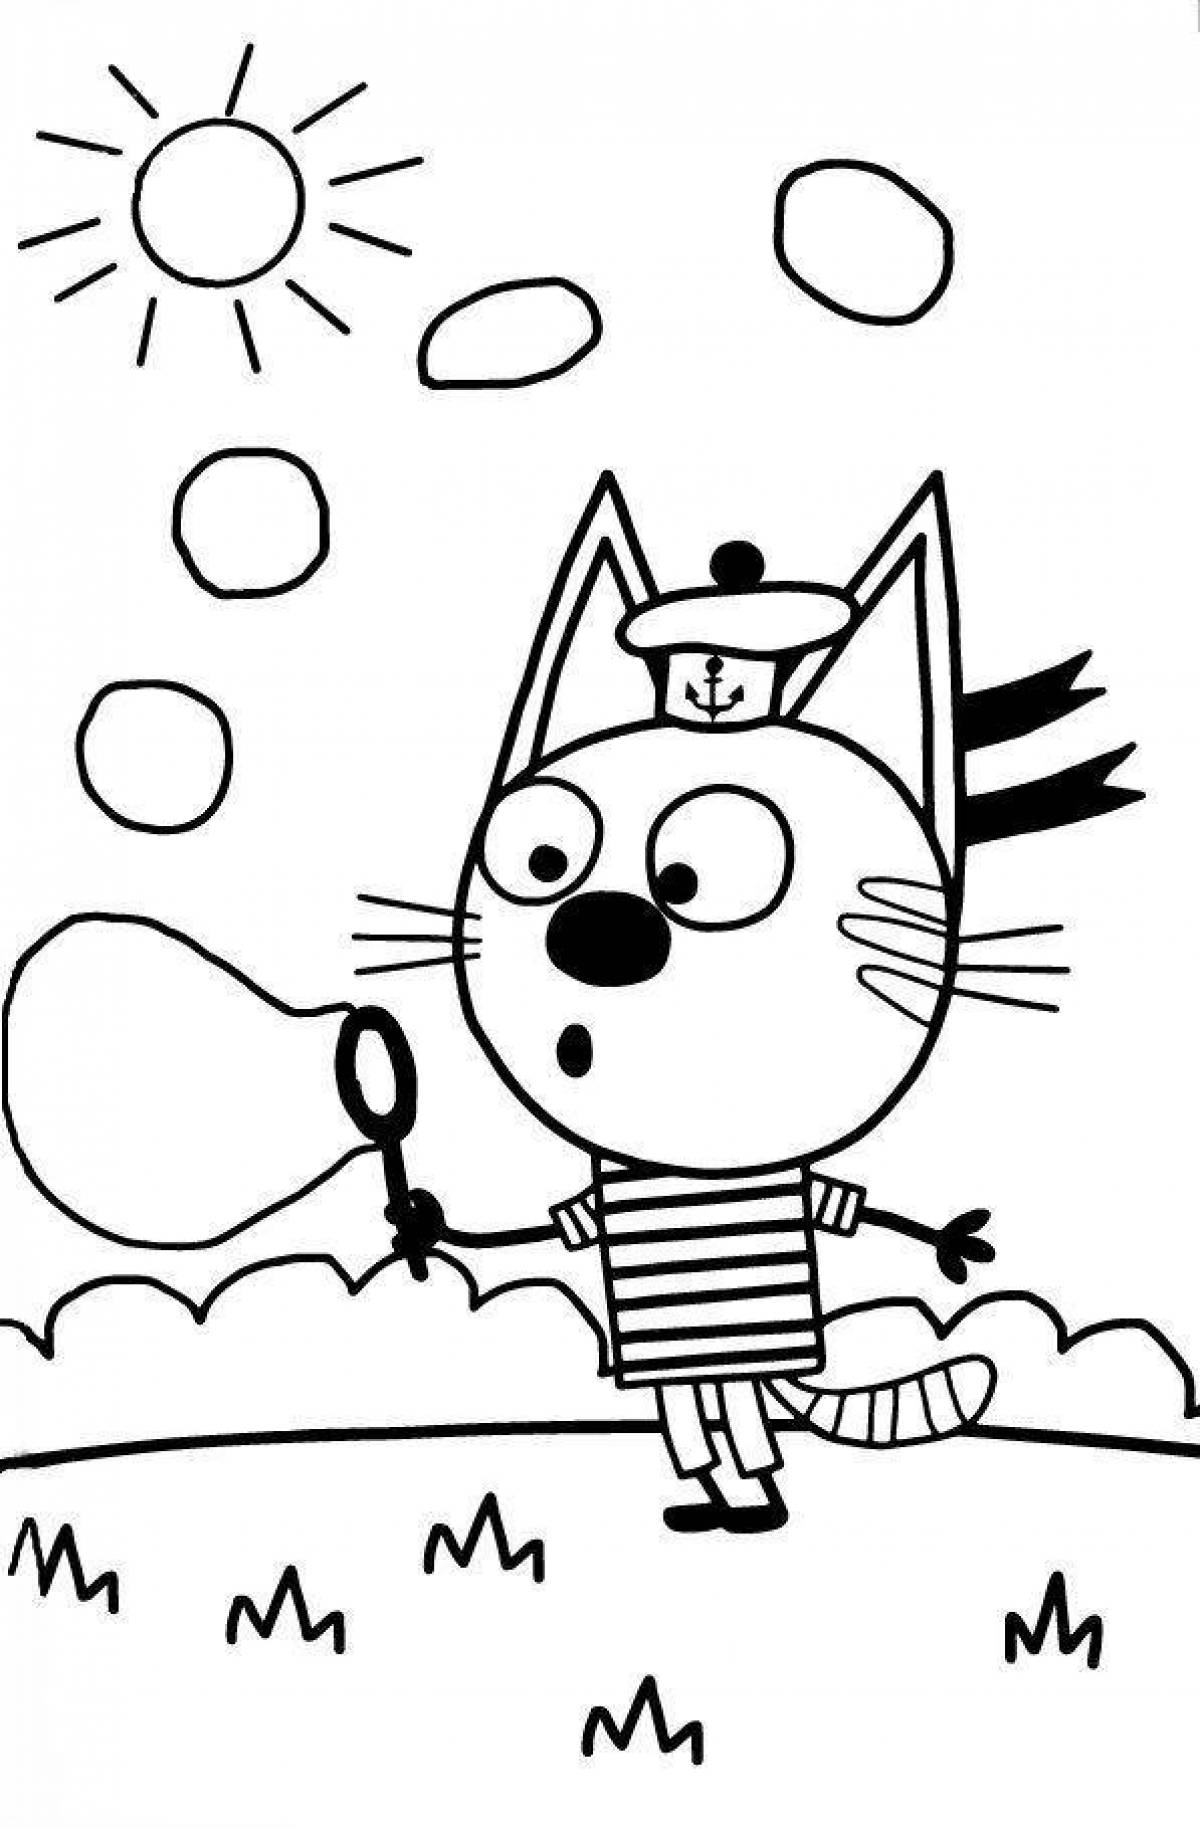 Amazing three cats coloring book for boys